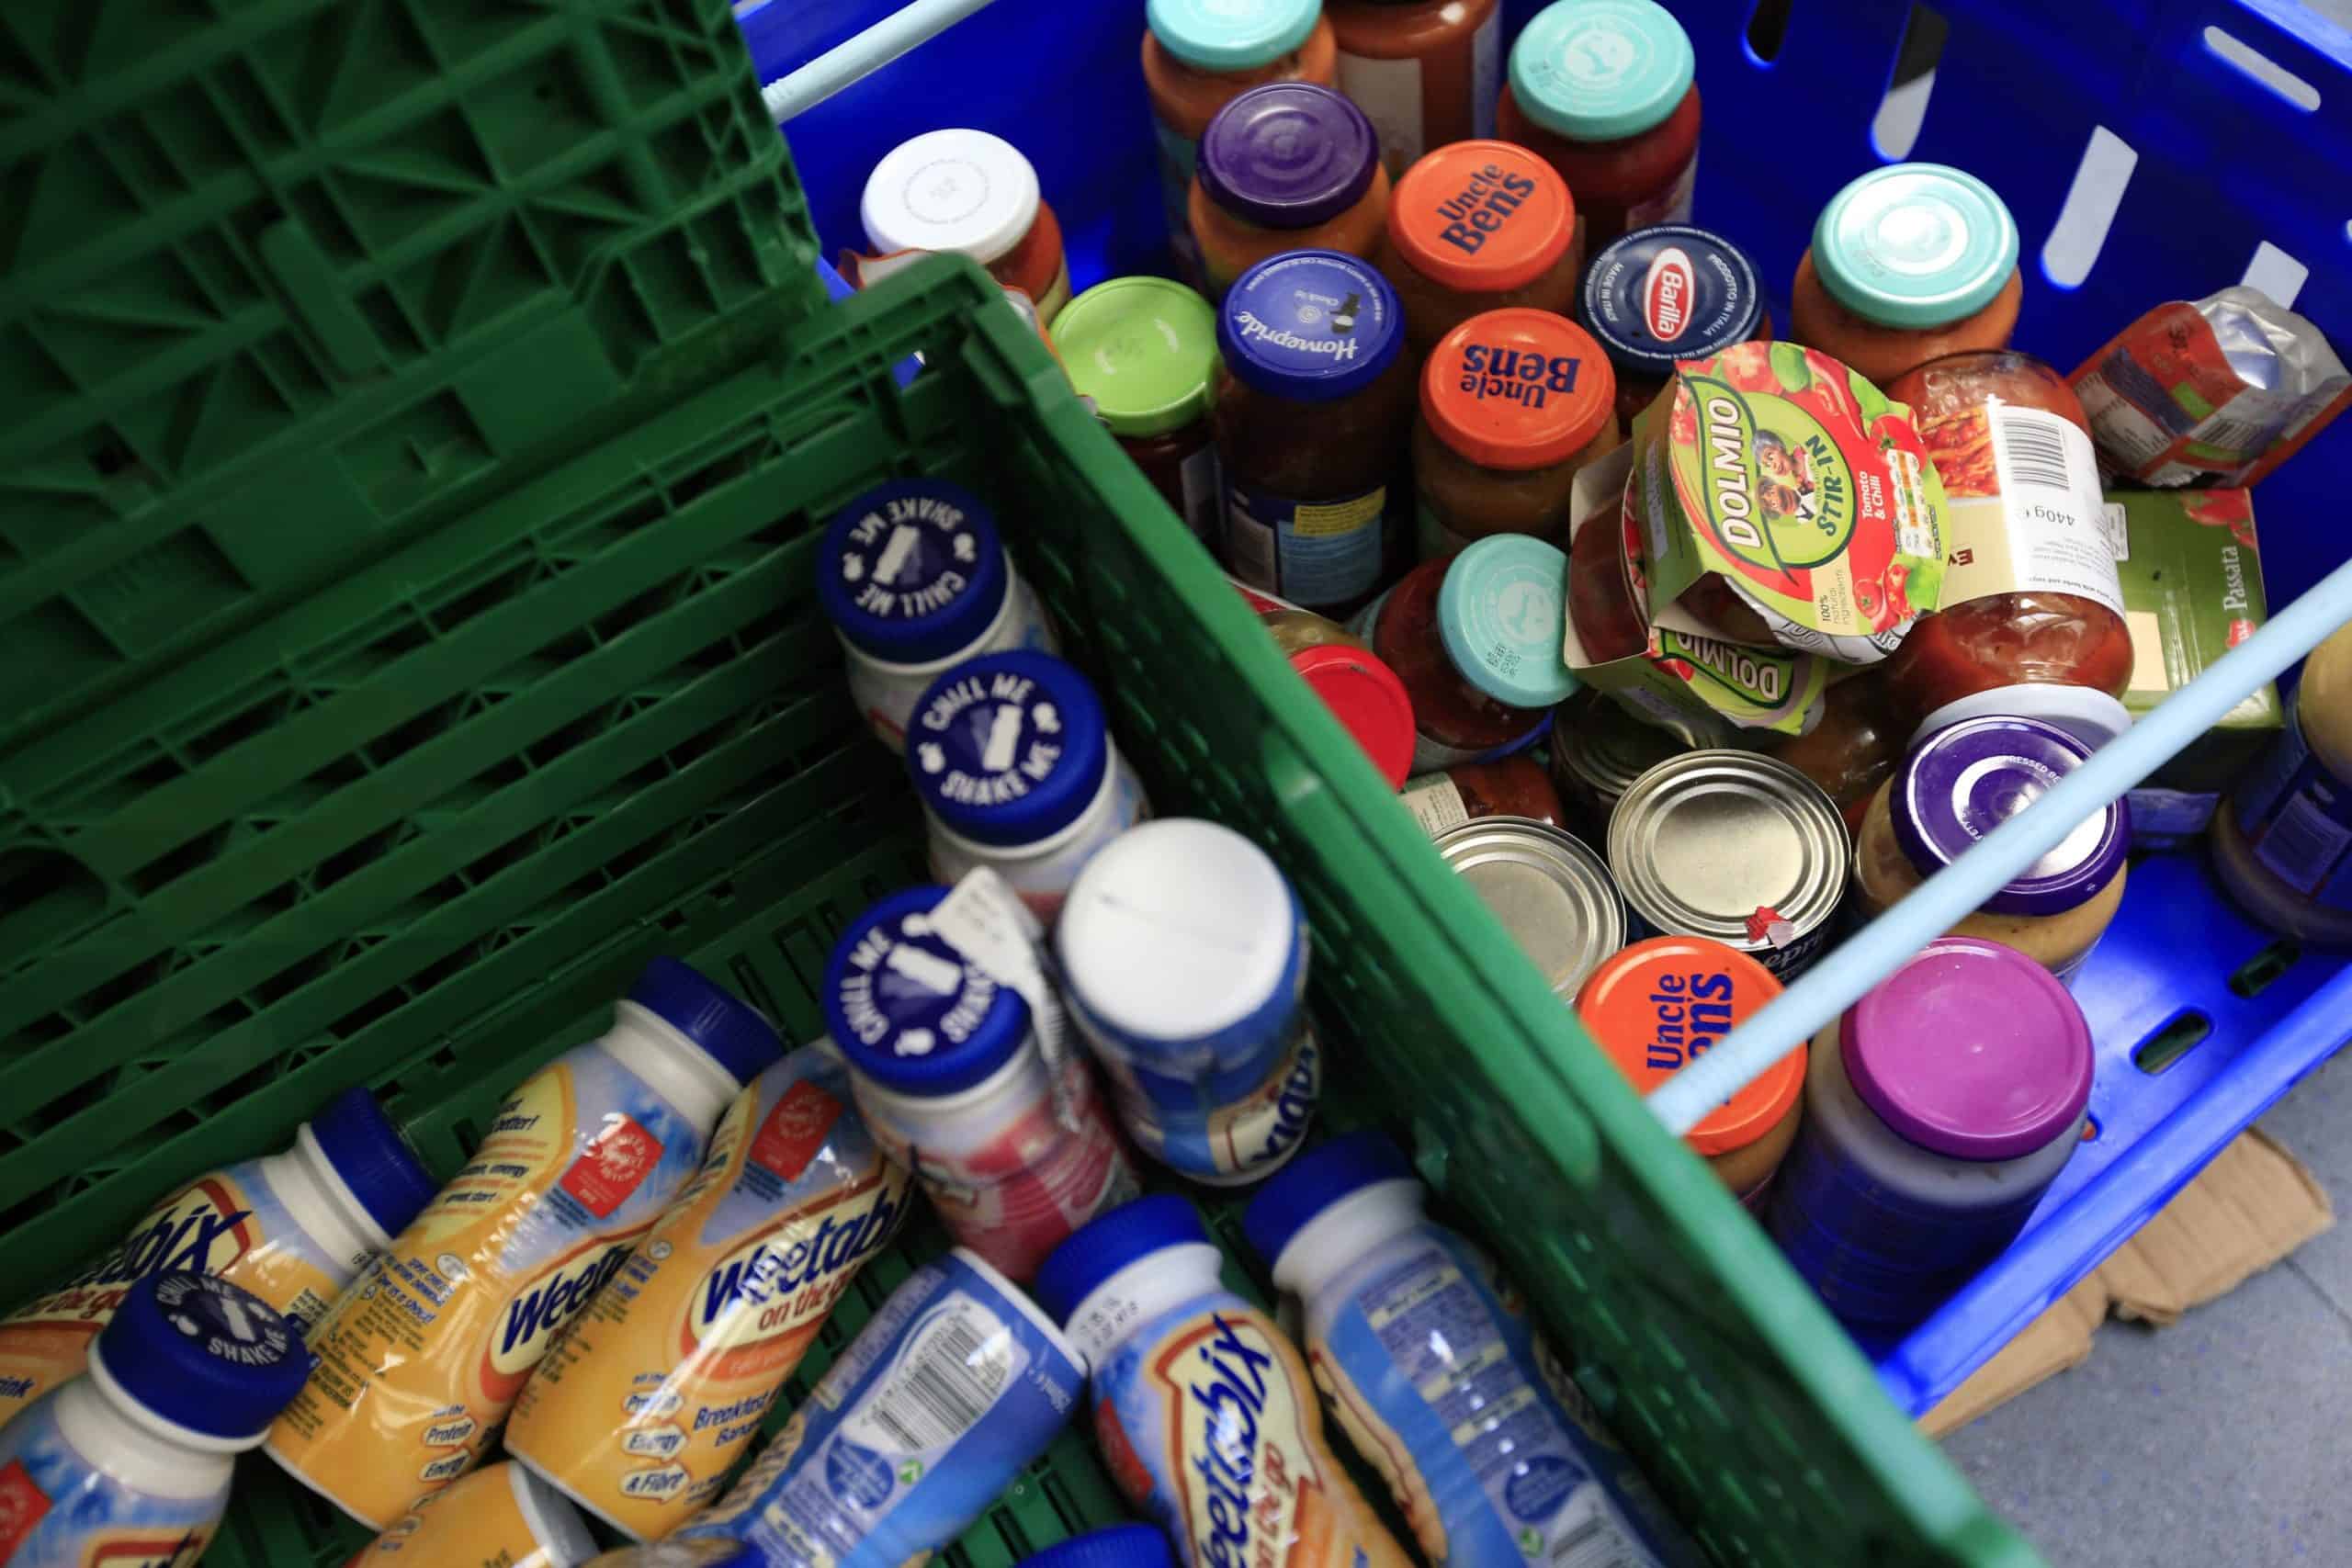 BT denies union claims that staff set up food bank for colleagues after tweet went viral